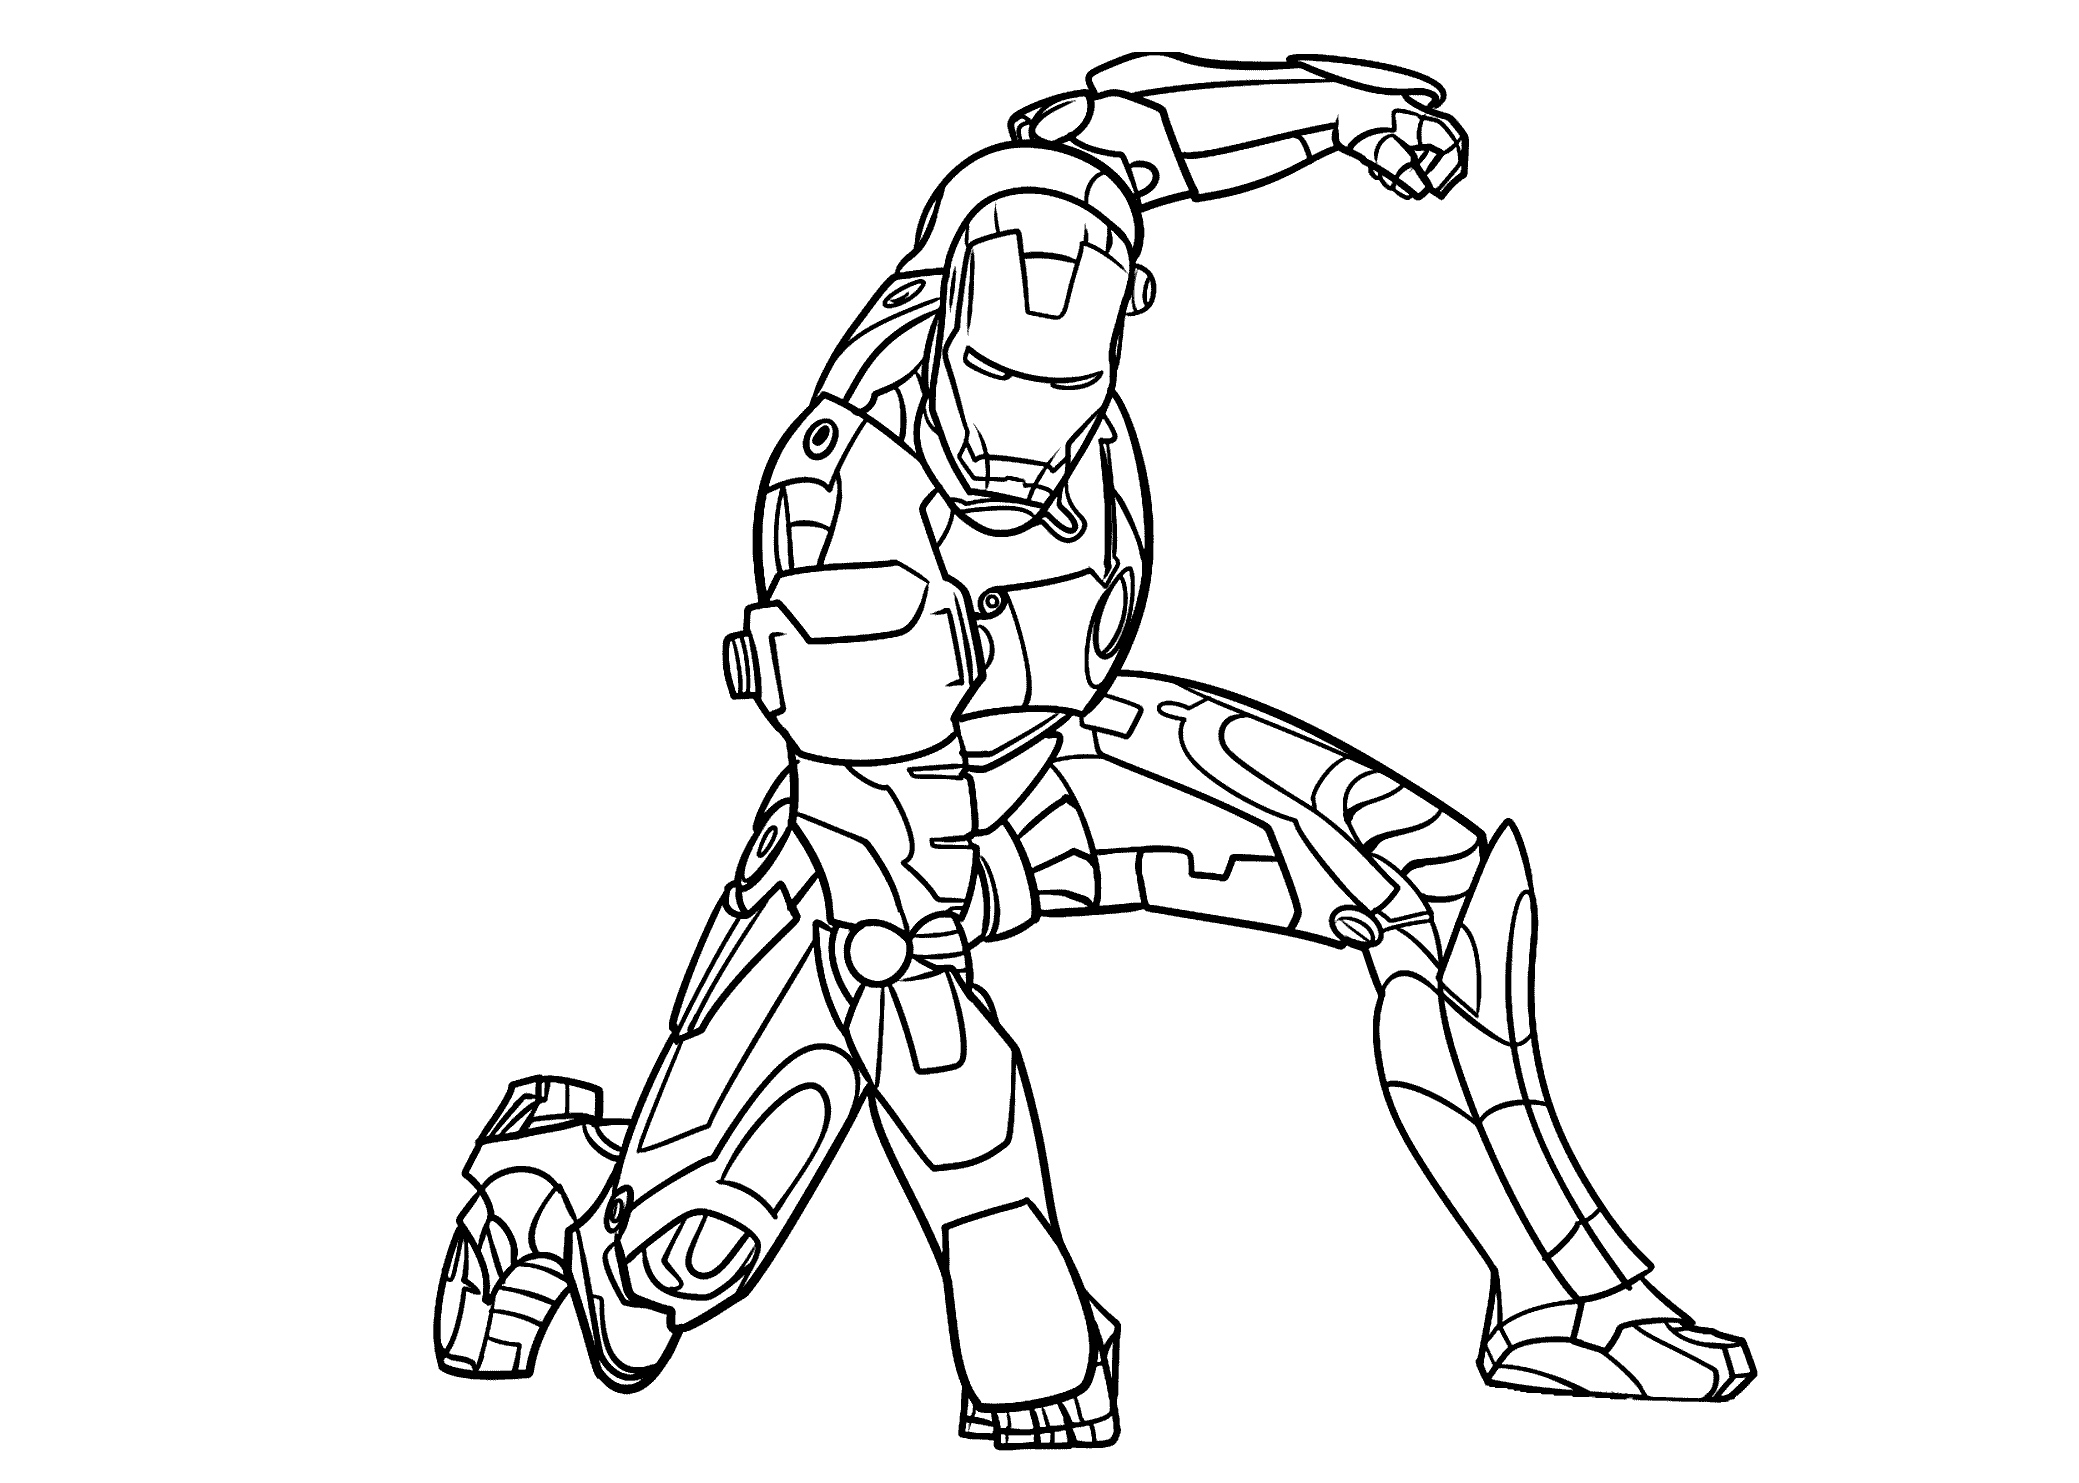 Iron Man Coloring Pages Free Printable - Coloring Home